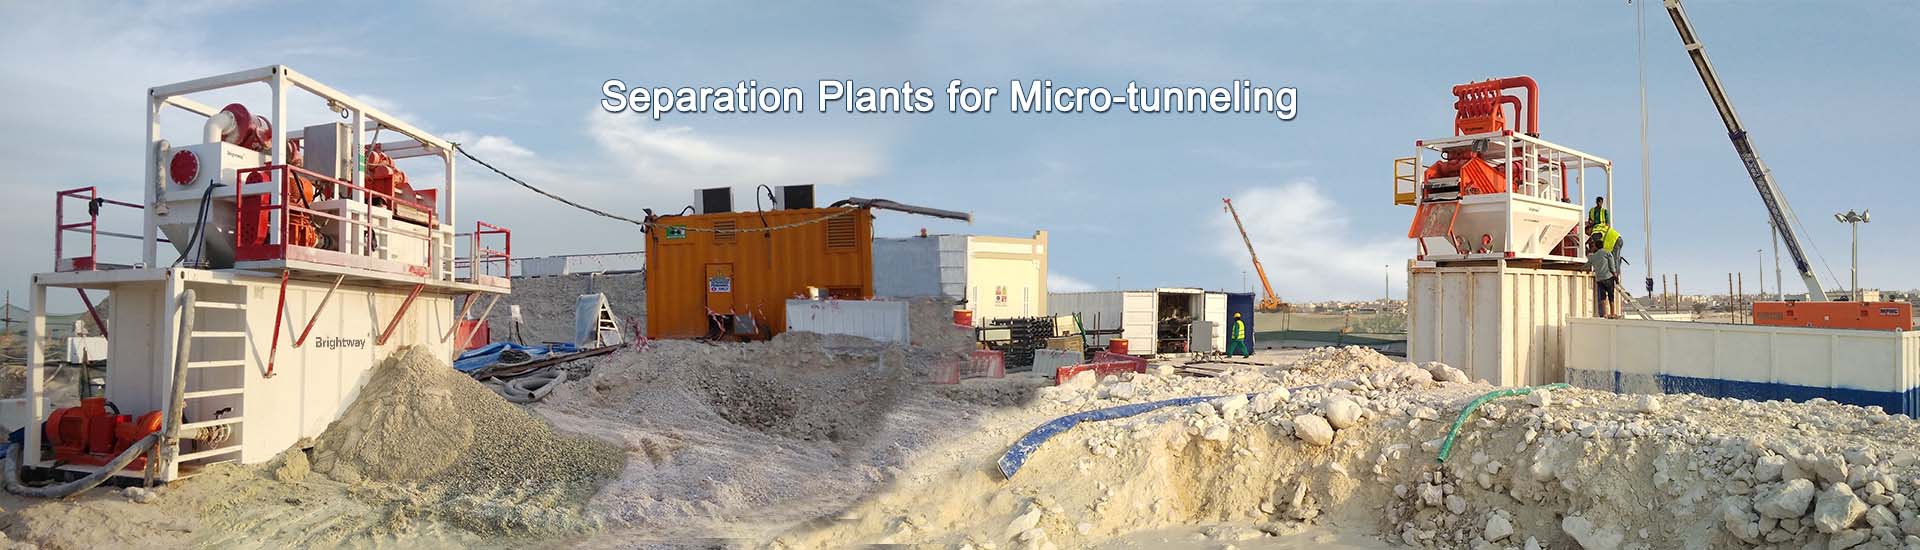 Separation Plants for Micro-tunneling